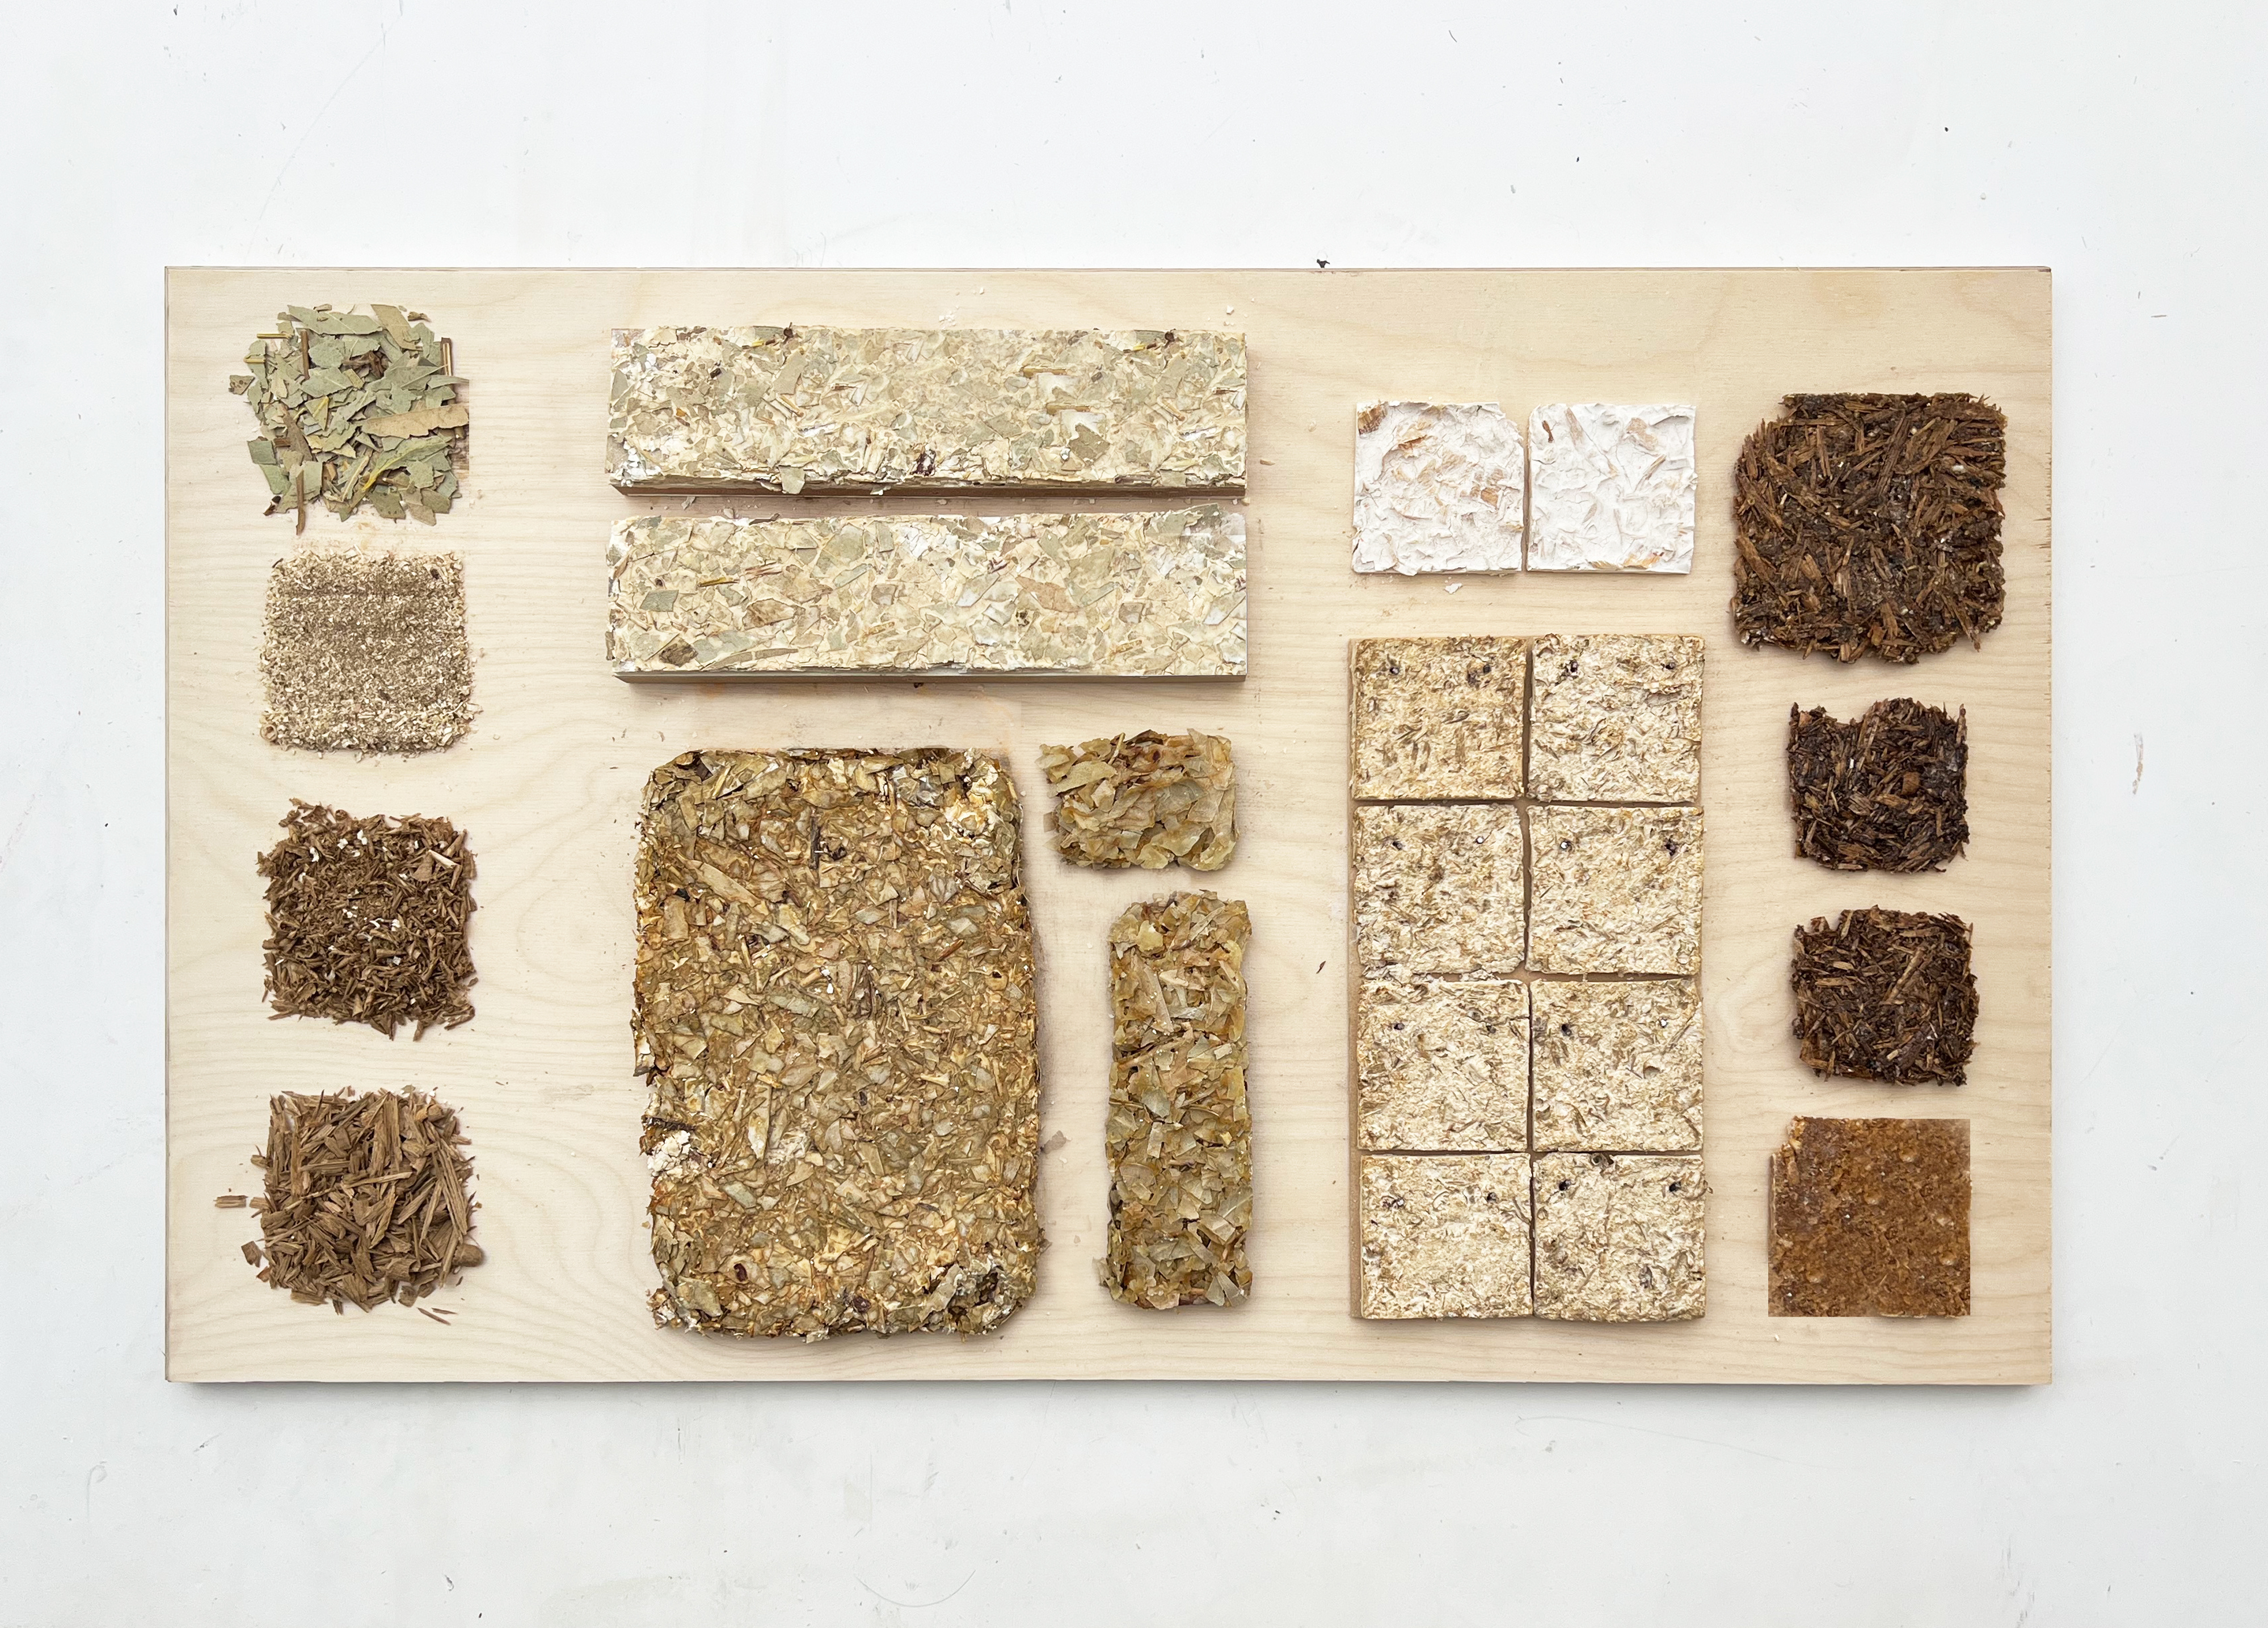 Eucalyptus, cornflour binder, pine resin, sawdust, and other matter used in Material Cultures’s research and building projects, created by the firm with Central Saint Martin students Adam Stanford and Sabina Shaybazyan. (Courtesy Material Cultures)